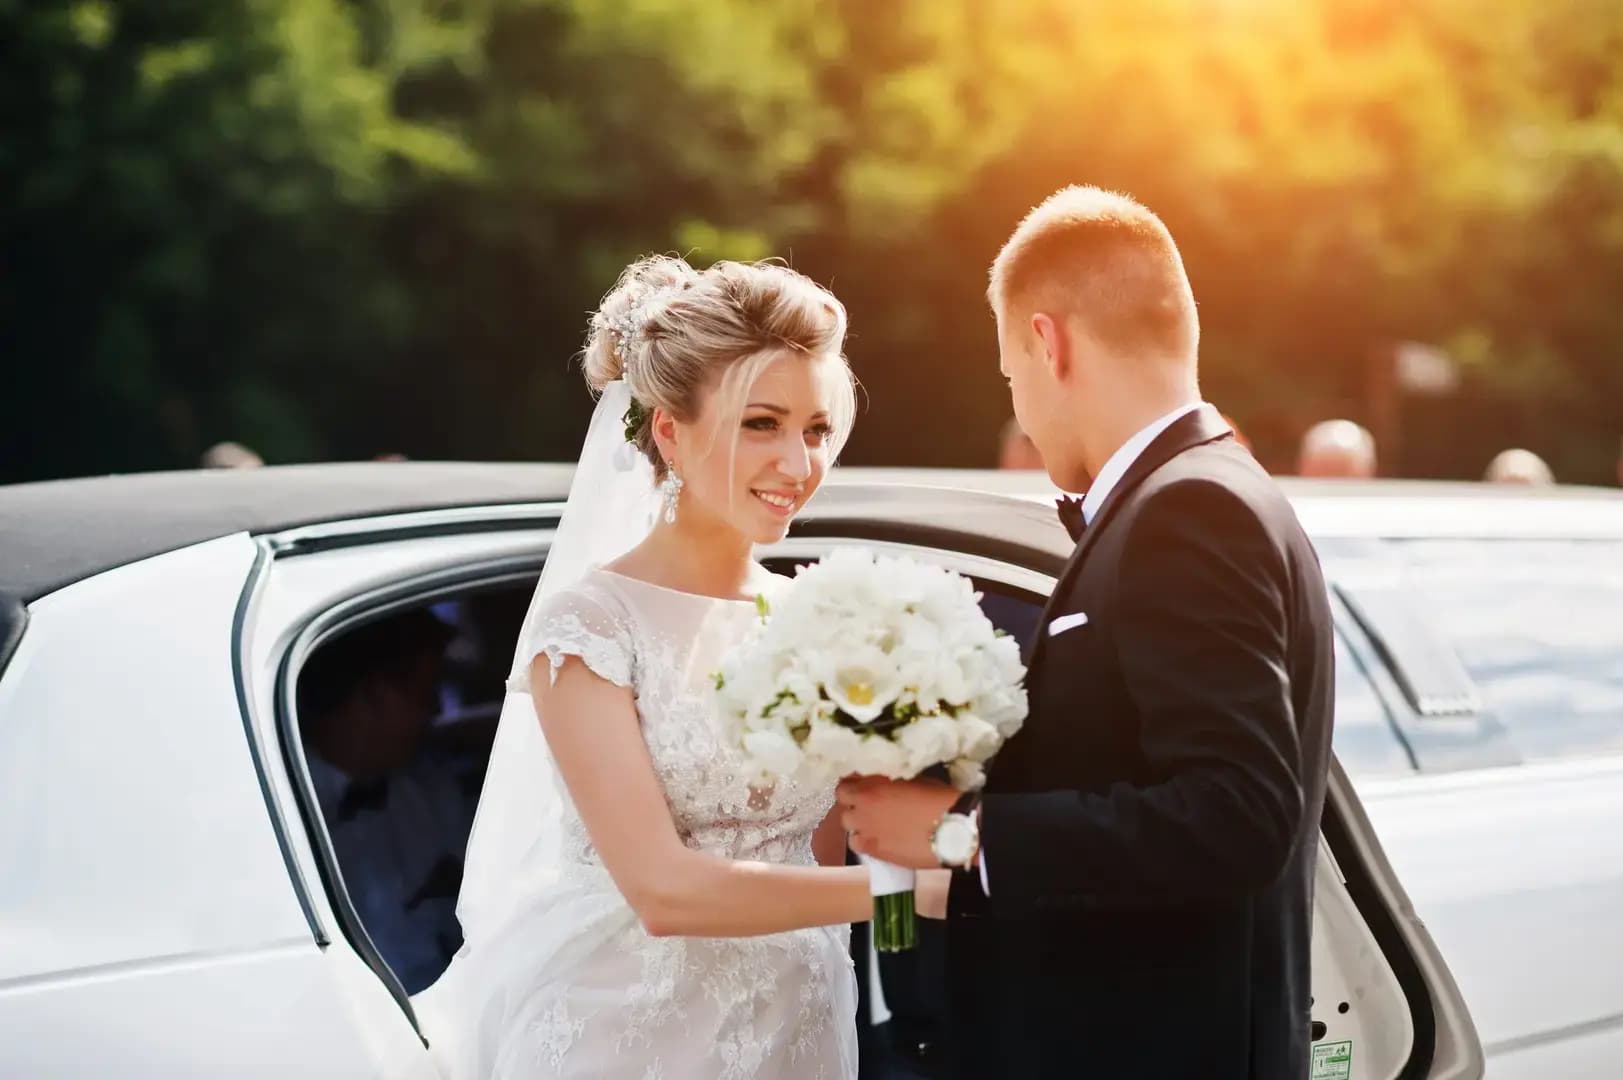 Wedding Cars Hire Melbourne- Asking Some Essential Queries